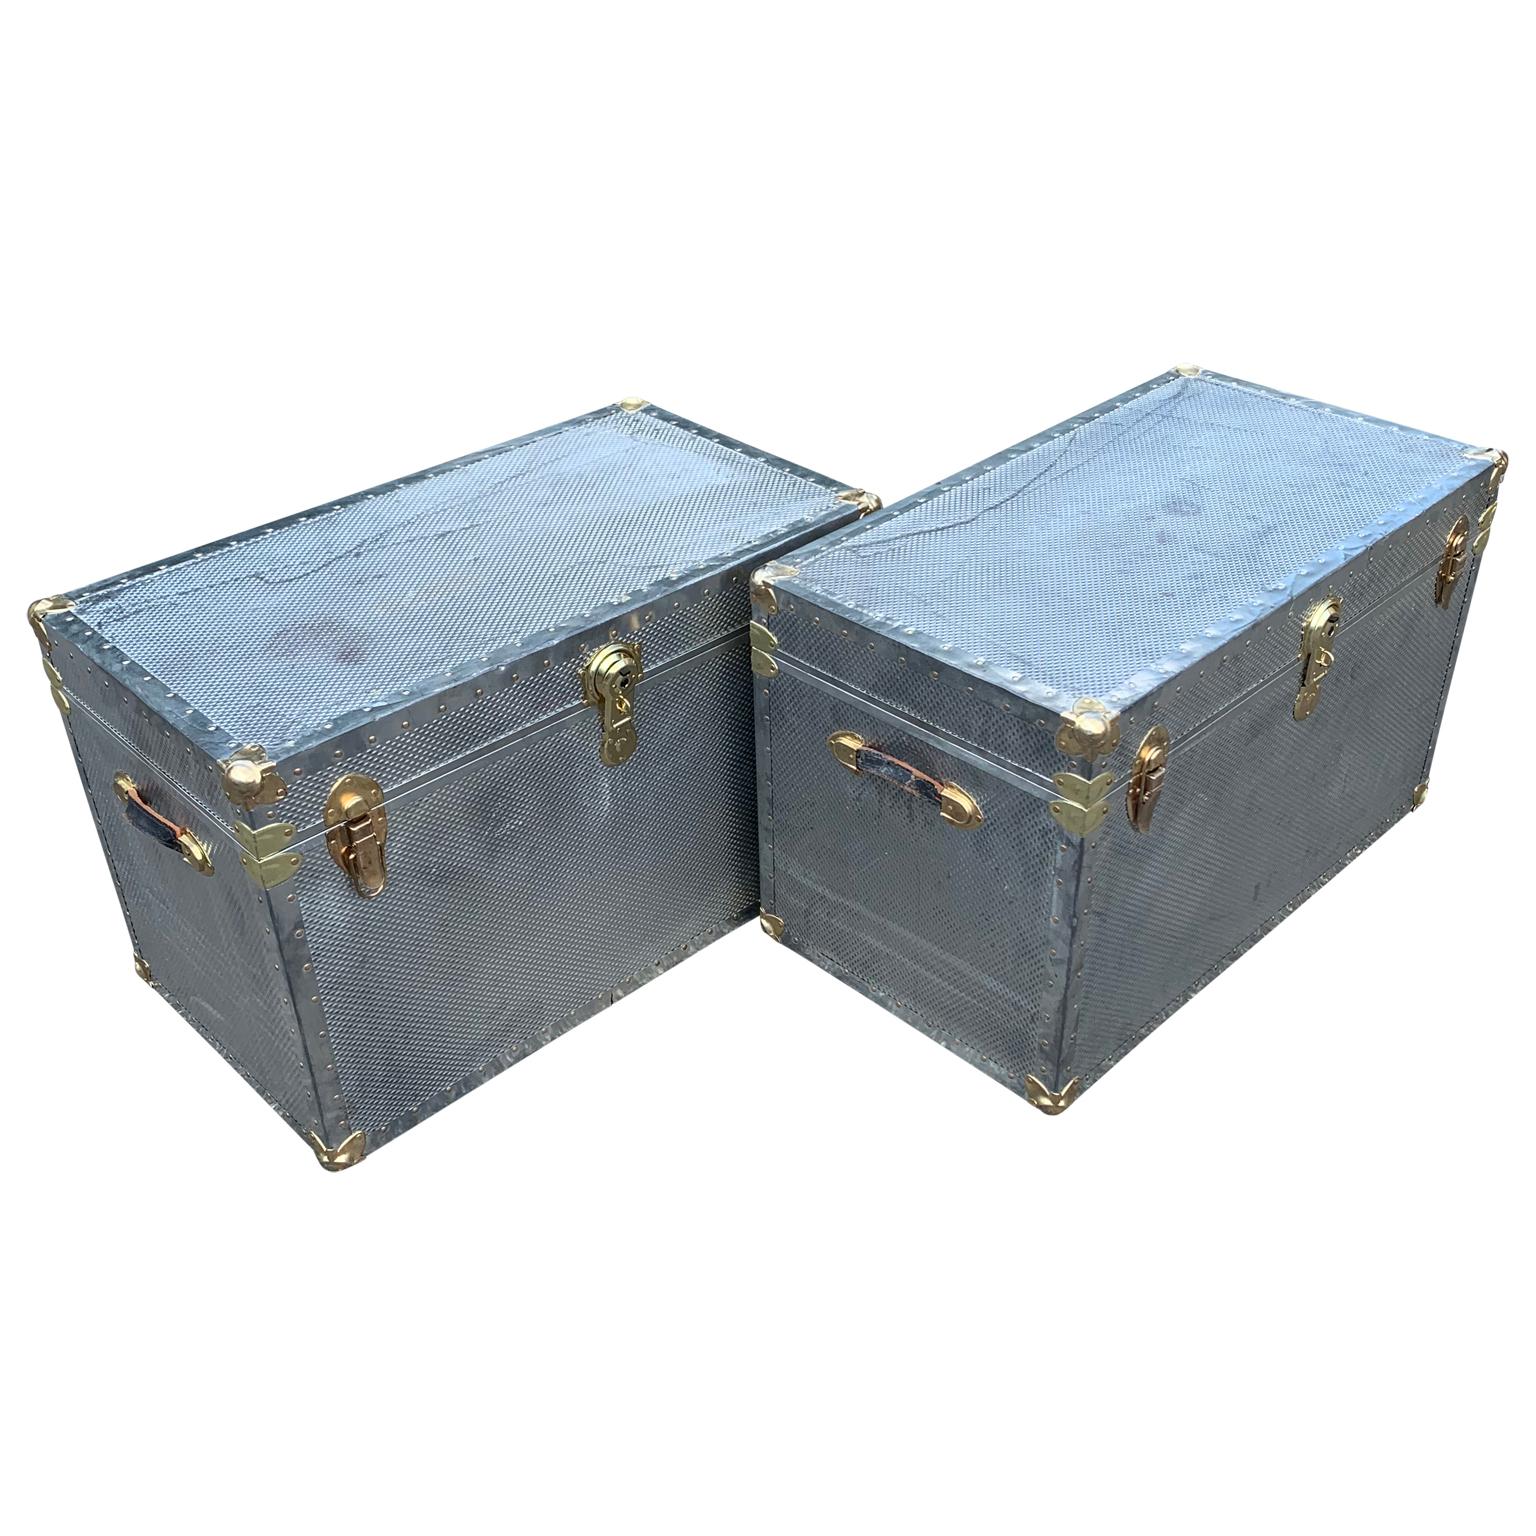 Two polished diamond aluminum and brass streamer trunks with leather handles.